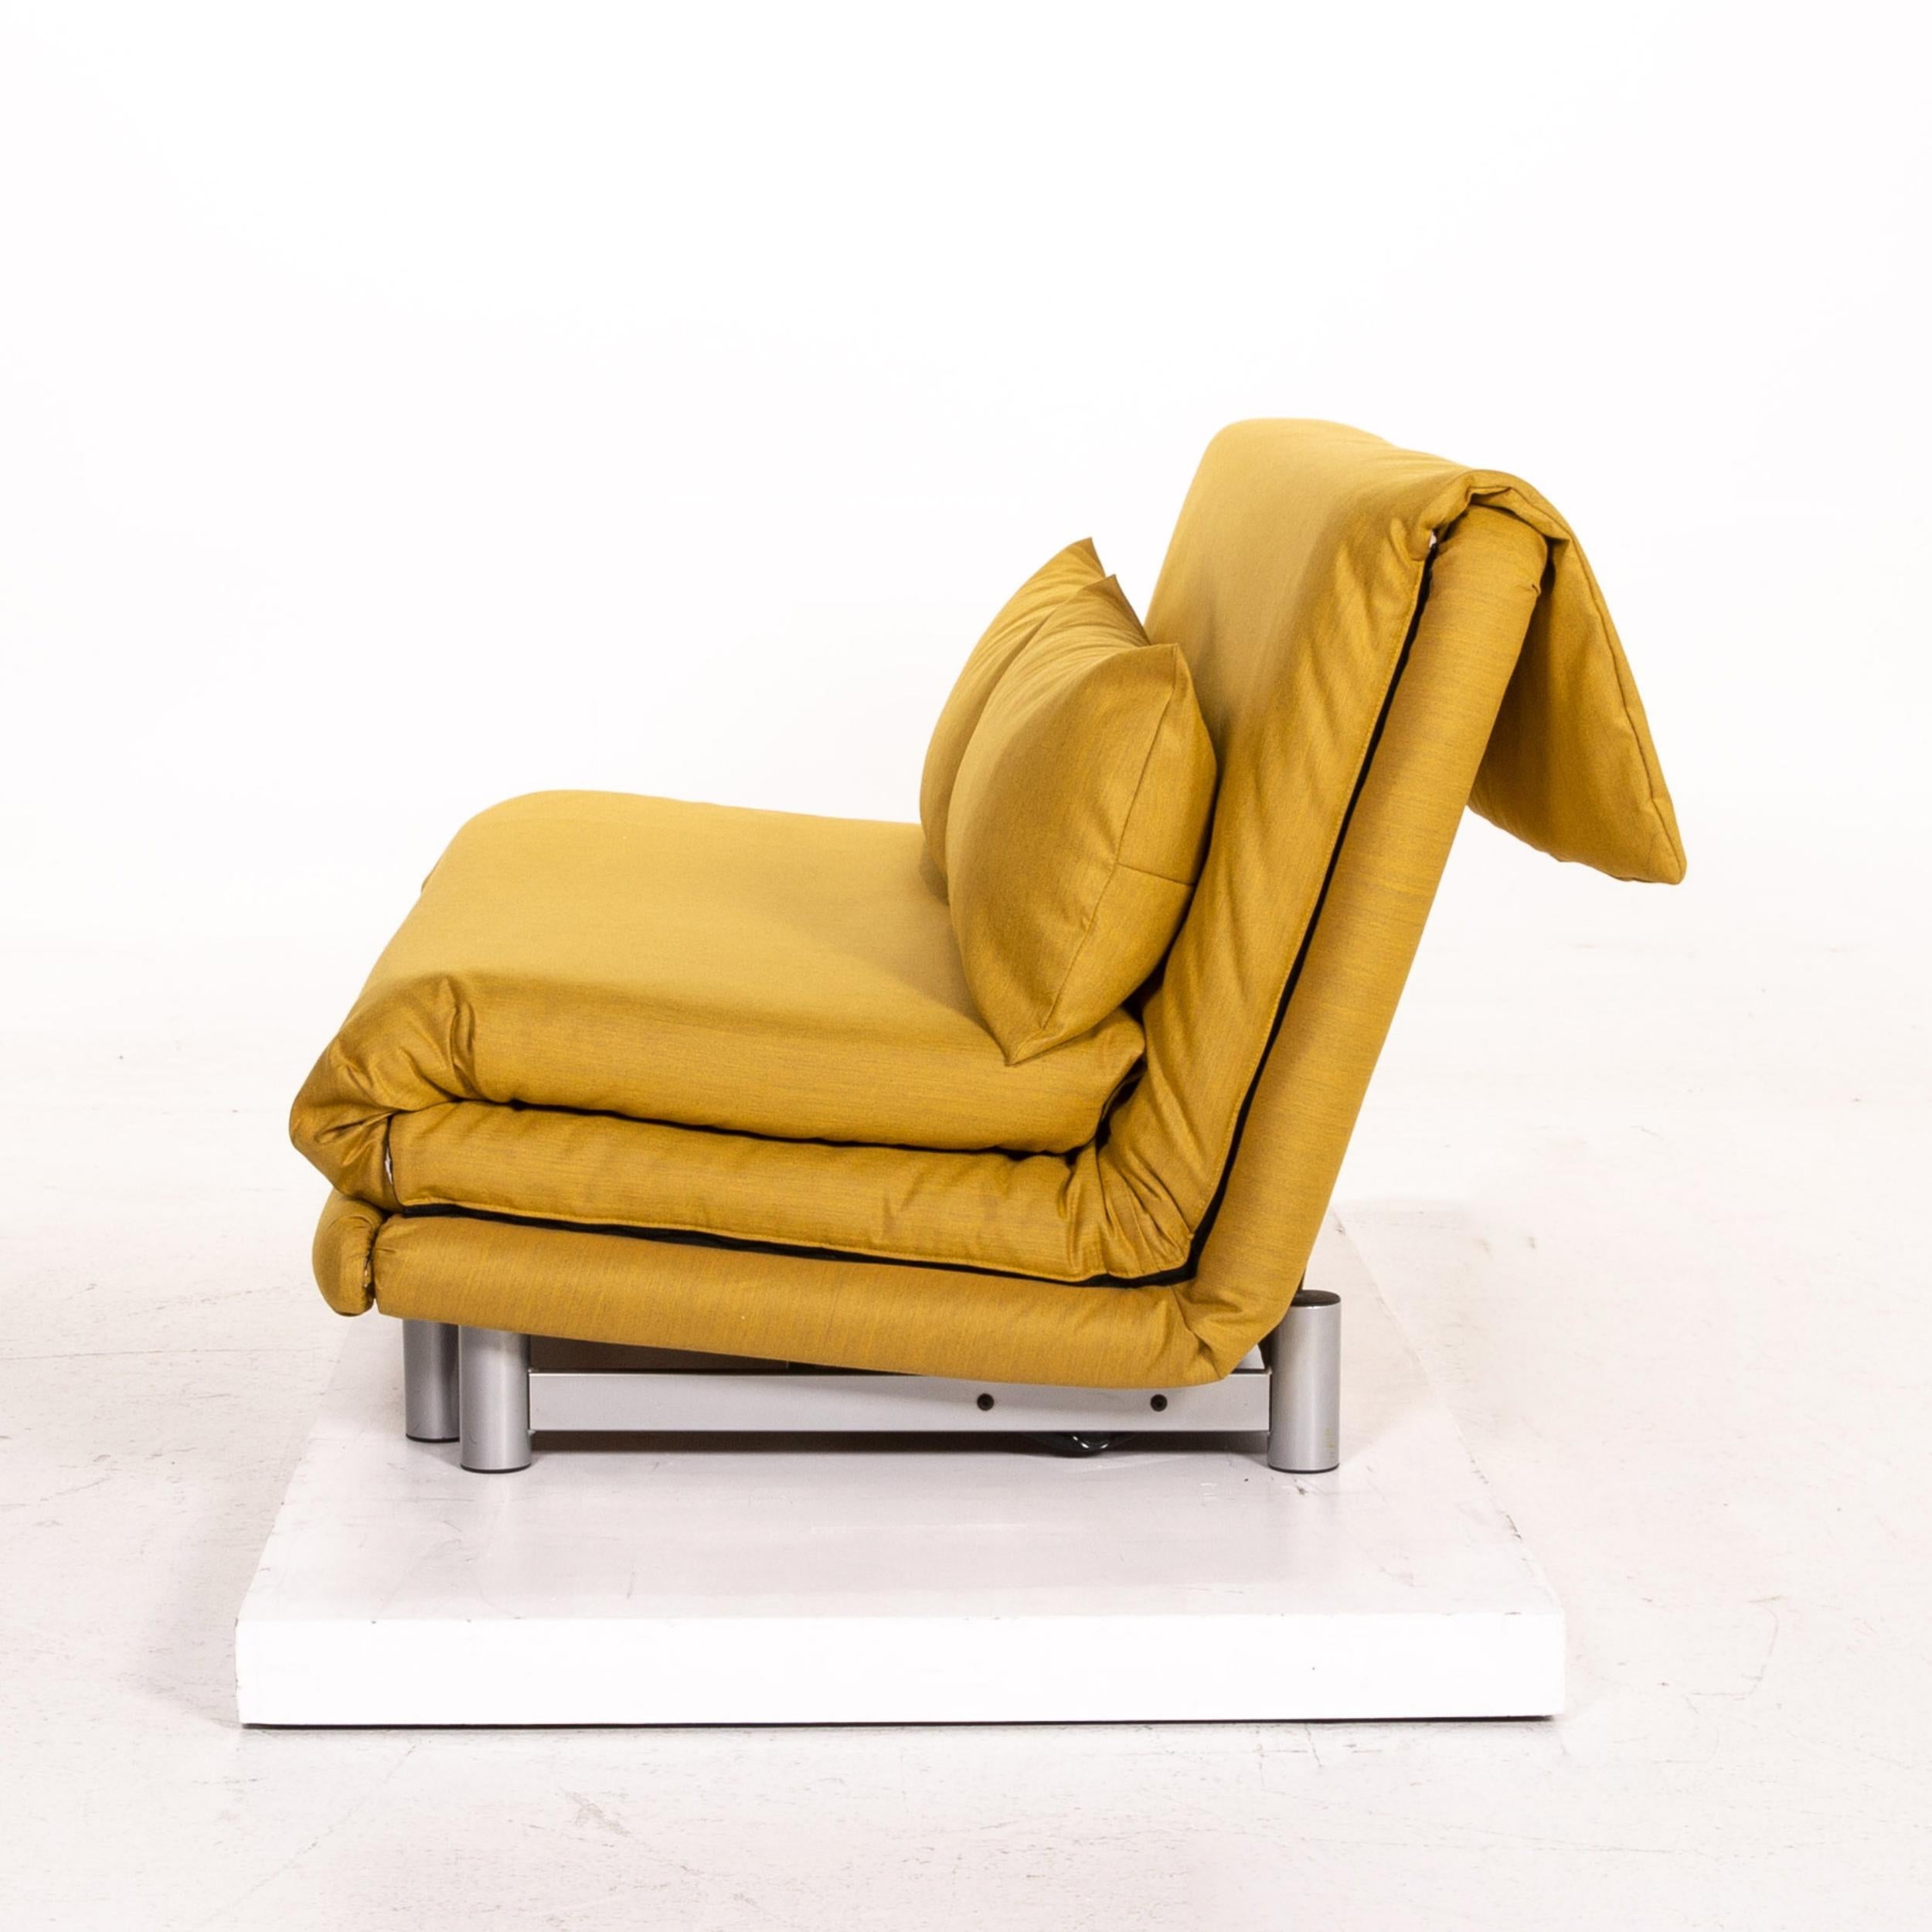 Ligne Roset Multy Fabric Sofa Bed Yellow Two-Seat Sofa Sleep Function Couch 3